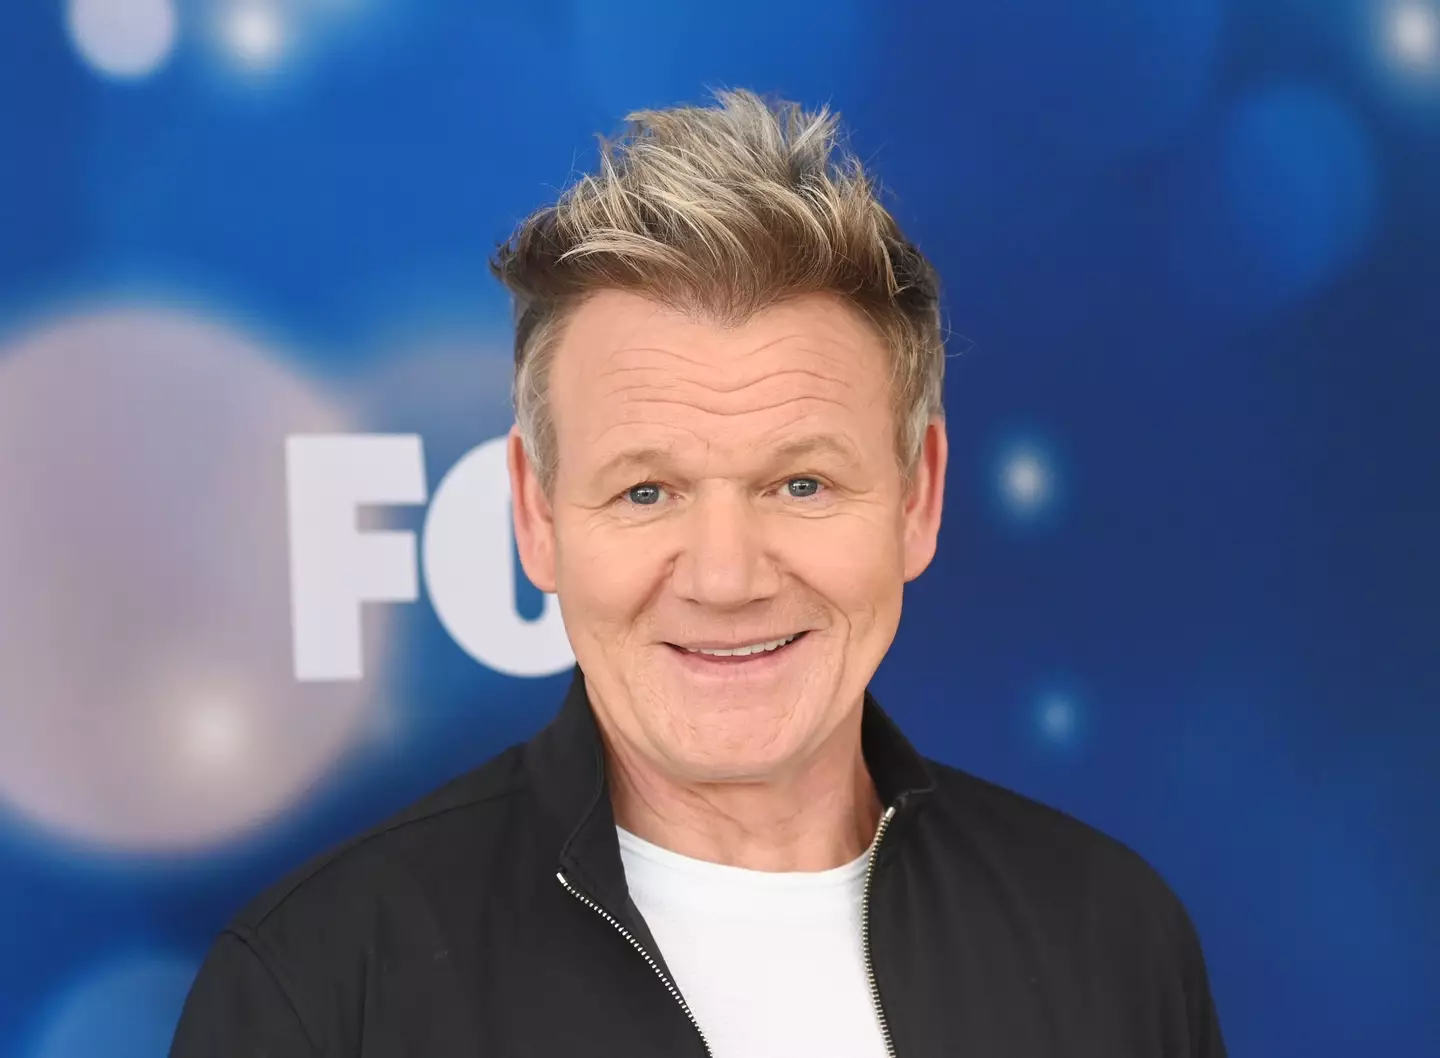 Despite the criticism, Gordon Ramsay defended Brooklyn and his cooking endeavours.